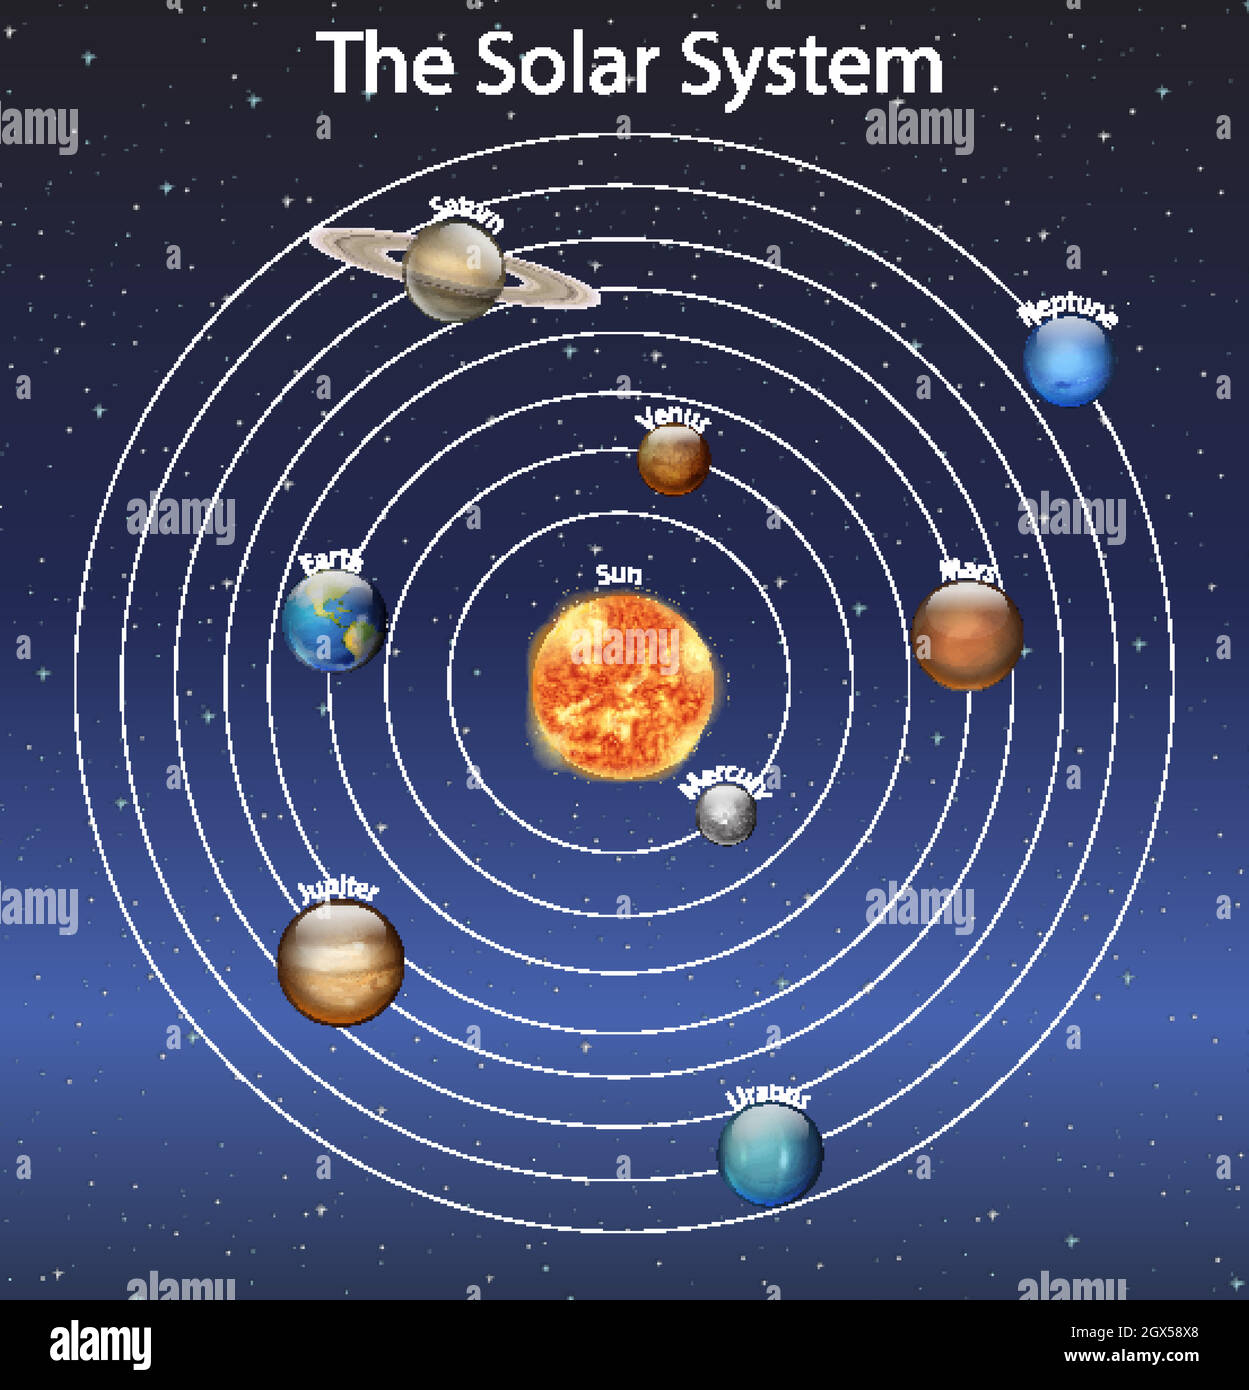 Diagram showing different planets in the solar system Stock Vector ...